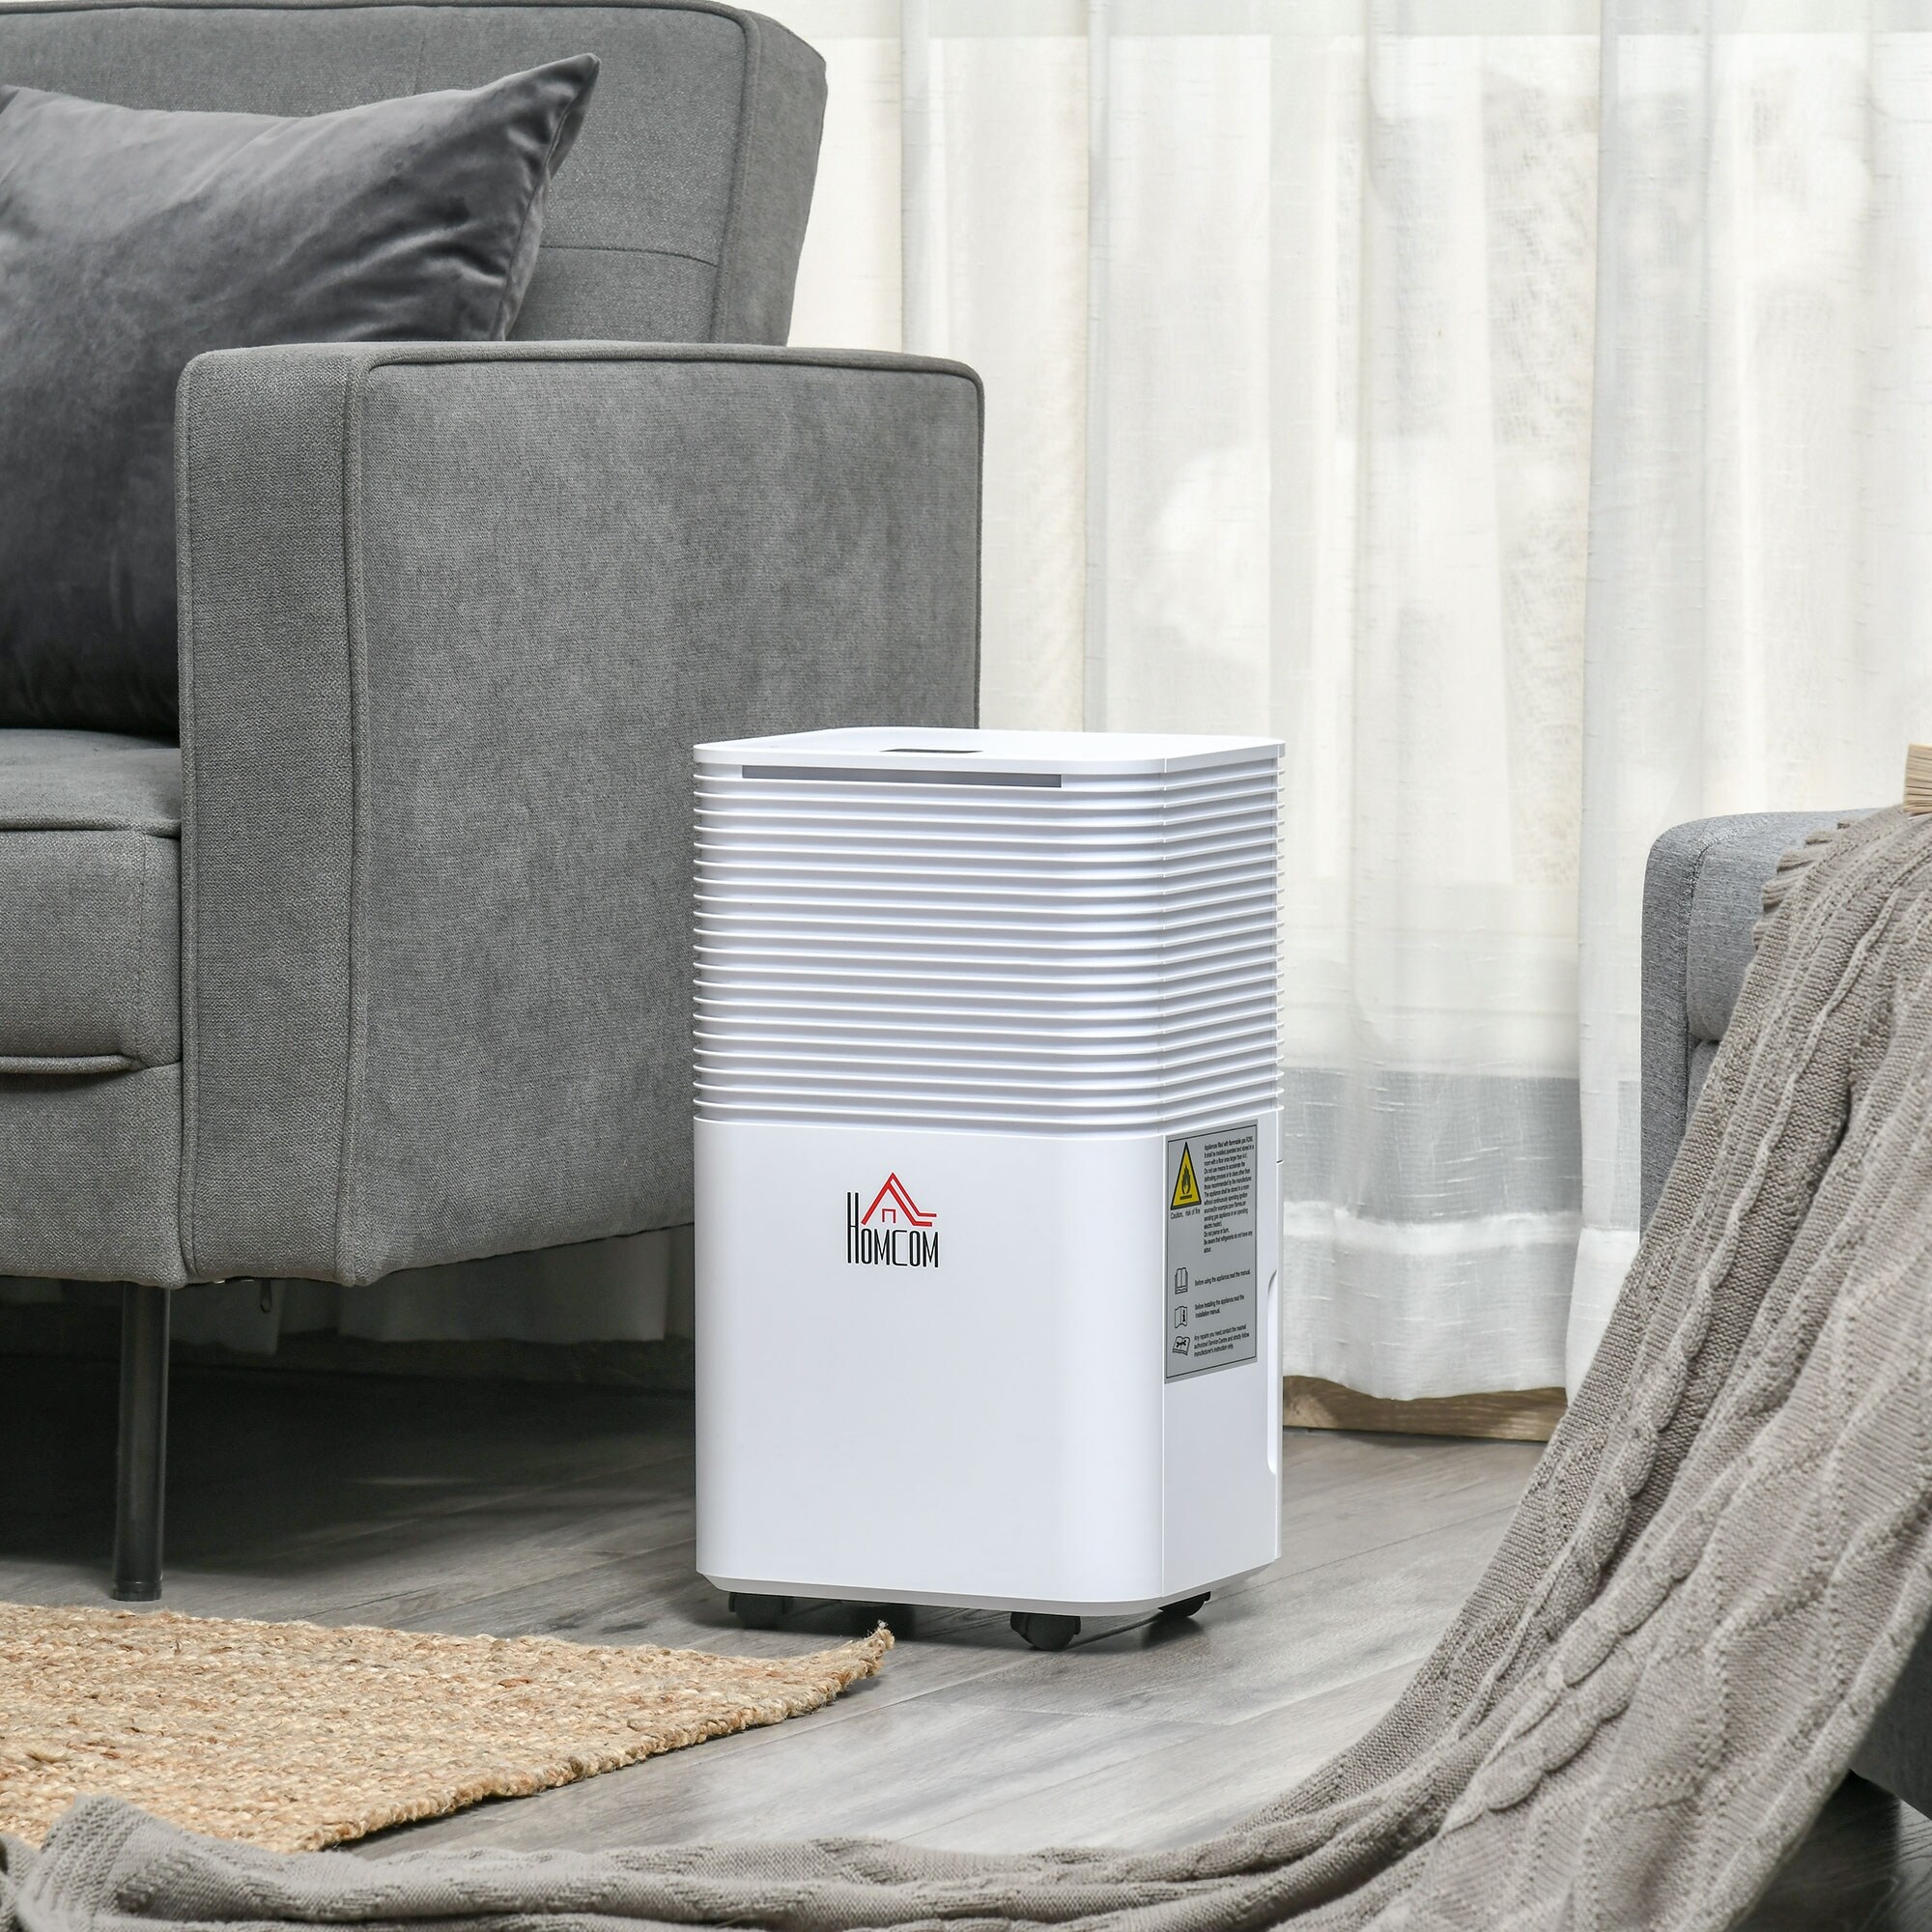 25 Pt. 1500 Sq. ft Dehumidifiers in White with Drain Hose and Water Tank, Auto or Manual Drainage for Home and Basements